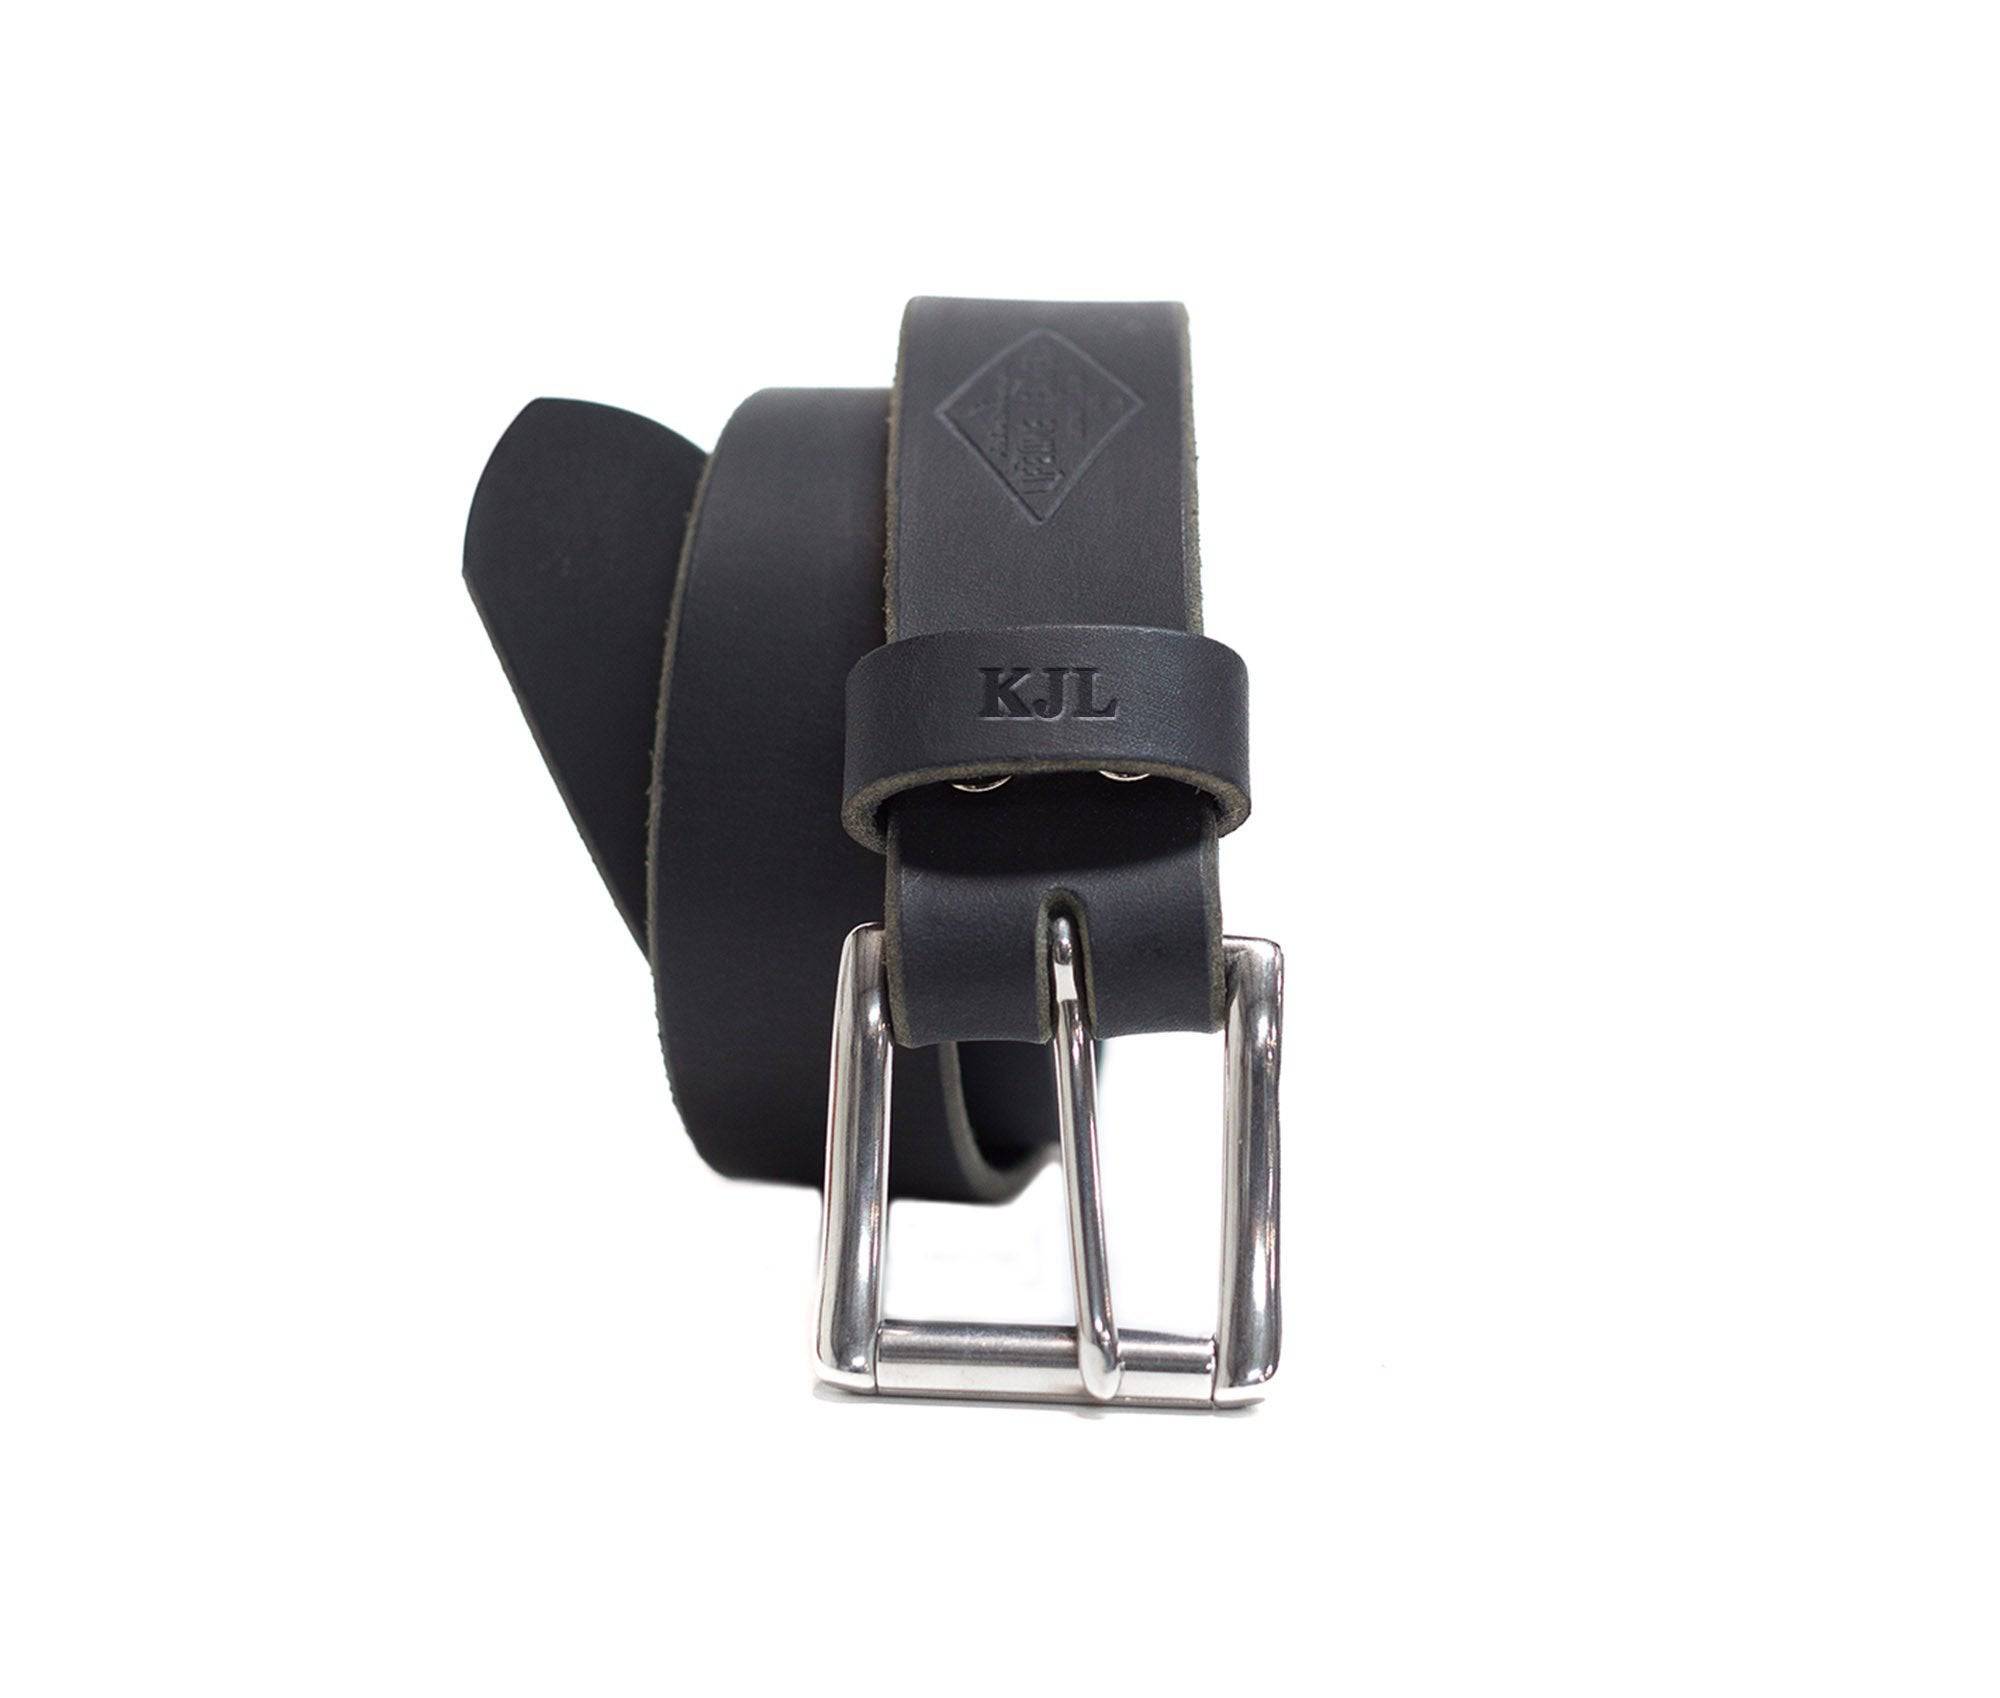  Leather Belt by Lifetime Leather Co Lifetime Leather Co Perfumarie